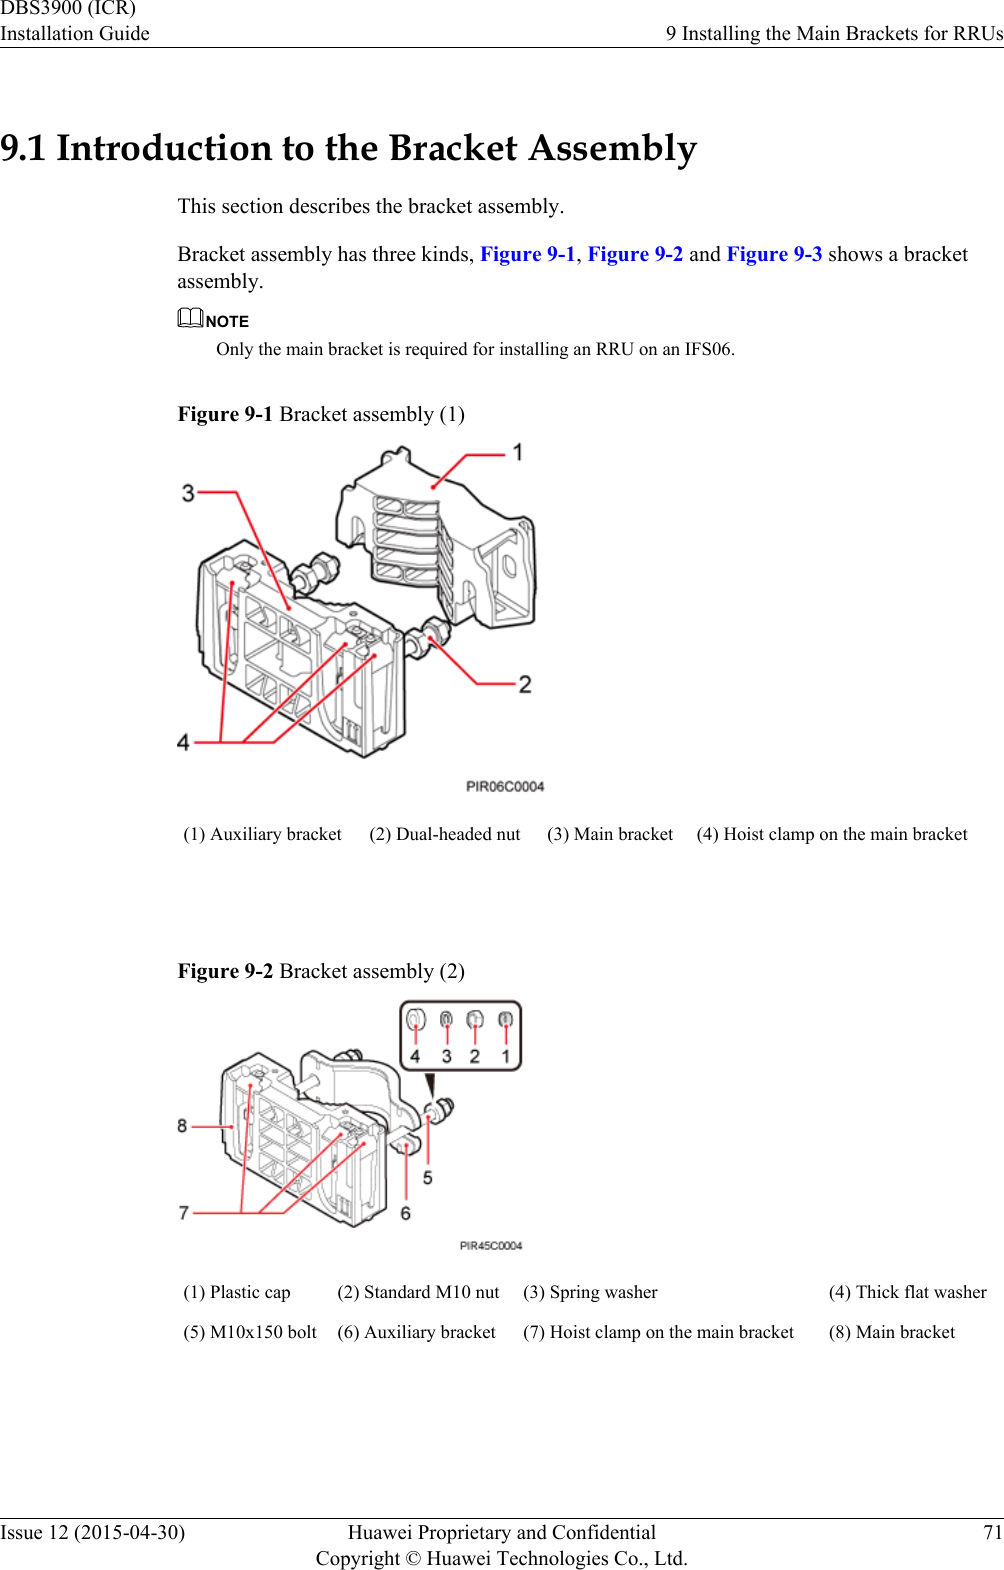 9.1 Introduction to the Bracket AssemblyThis section describes the bracket assembly.Bracket assembly has three kinds, Figure 9-1, Figure 9-2 and Figure 9-3 shows a bracketassembly.NOTEOnly the main bracket is required for installing an RRU on an IFS06.Figure 9-1 Bracket assembly (1)(1) Auxiliary bracket (2) Dual-headed nut (3) Main bracket (4) Hoist clamp on the main bracket Figure 9-2 Bracket assembly (2)(1) Plastic cap (2) Standard M10 nut (3) Spring washer (4) Thick flat washer(5) M10x150 bolt (6) Auxiliary bracket (7) Hoist clamp on the main bracket (8) Main bracket DBS3900 (ICR)Installation Guide 9 Installing the Main Brackets for RRUsIssue 12 (2015-04-30) Huawei Proprietary and ConfidentialCopyright © Huawei Technologies Co., Ltd.71